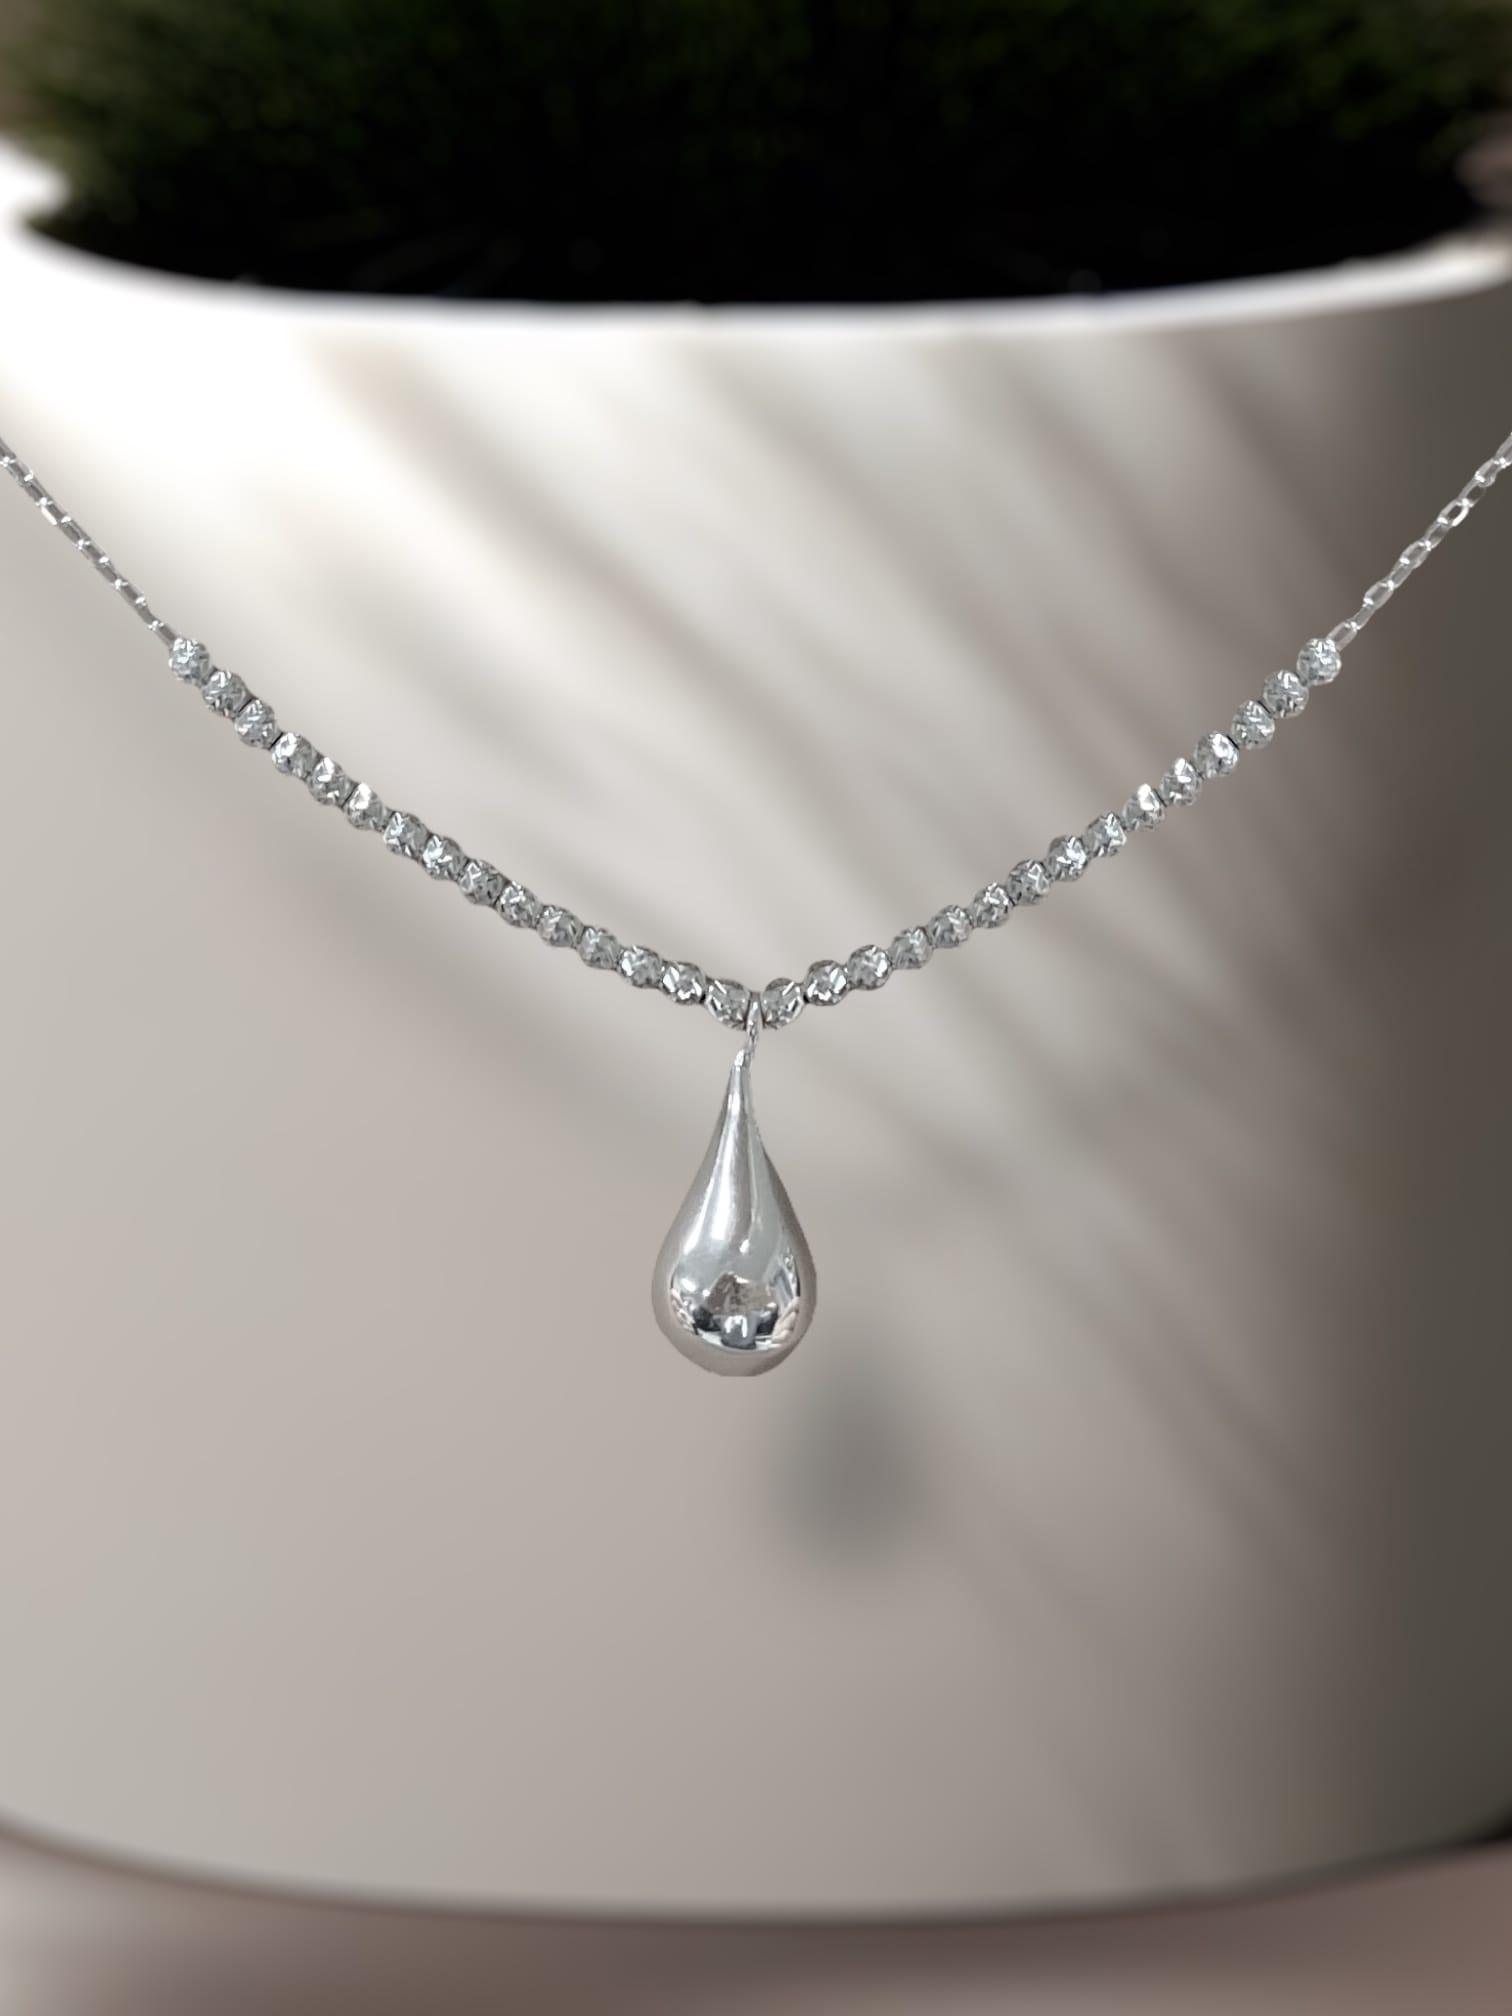 Stunning Silver Teardrop Necklace Kit - Too Cute Beads